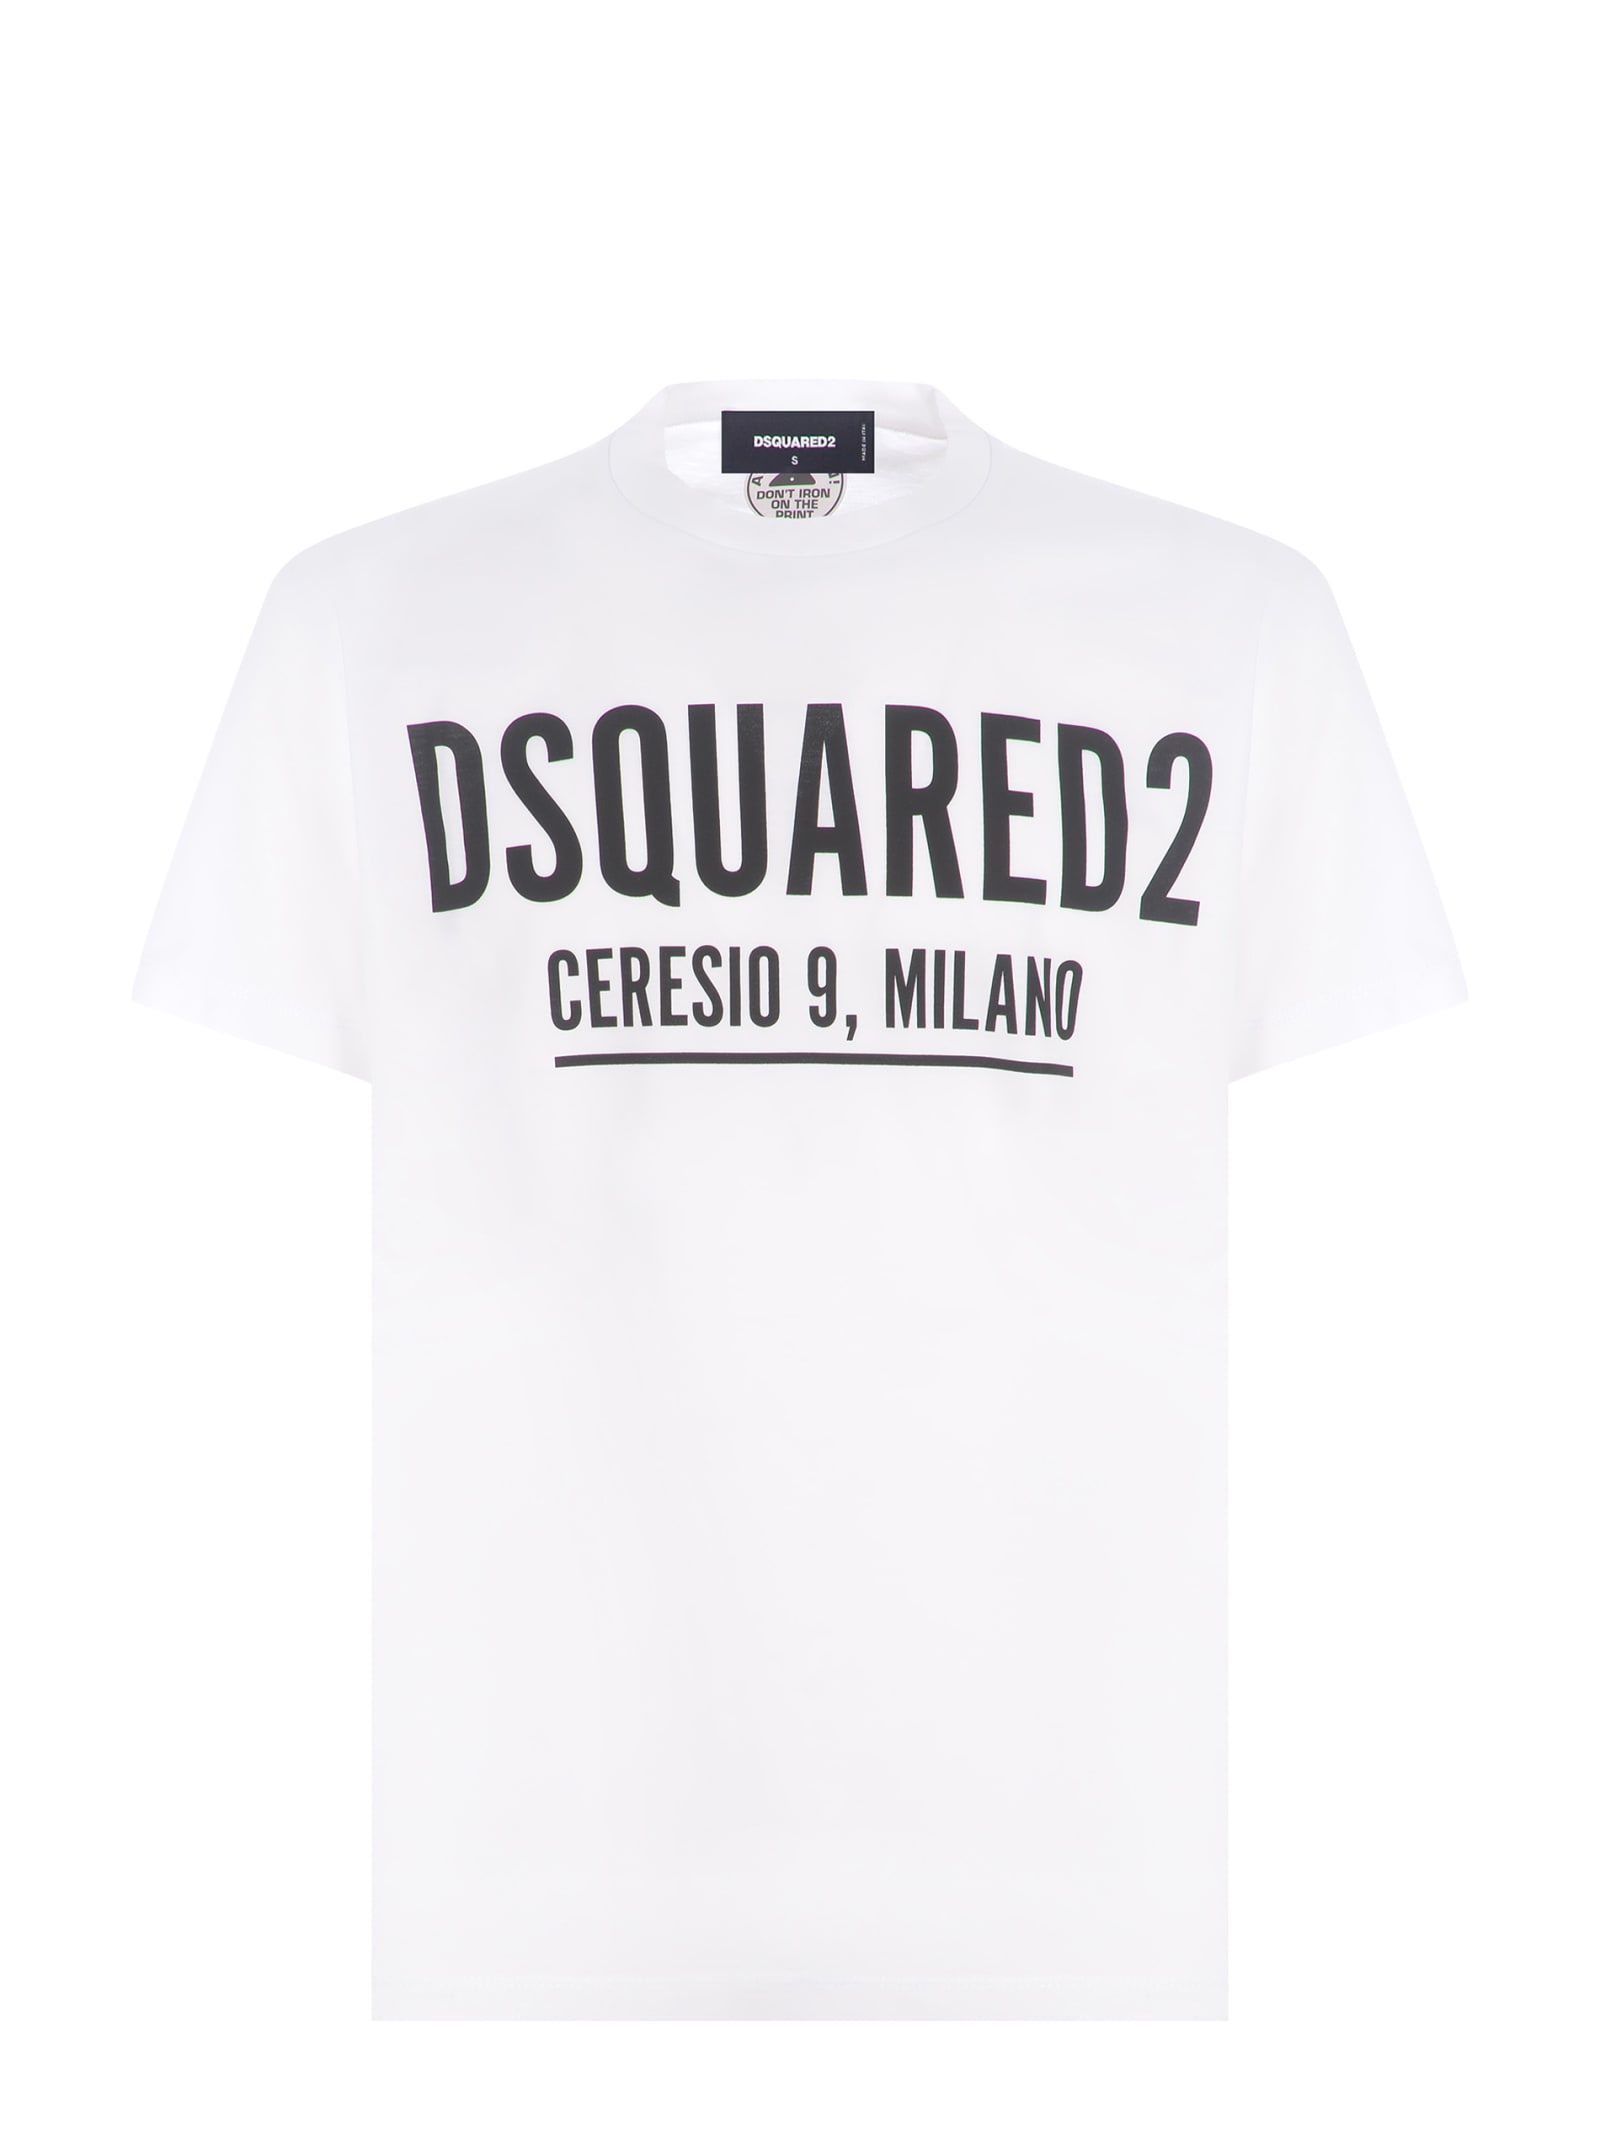 DSQUARED2 T-SHIRT DSQUARED2 CERESIO9,MILANO MADE OF JERSEY